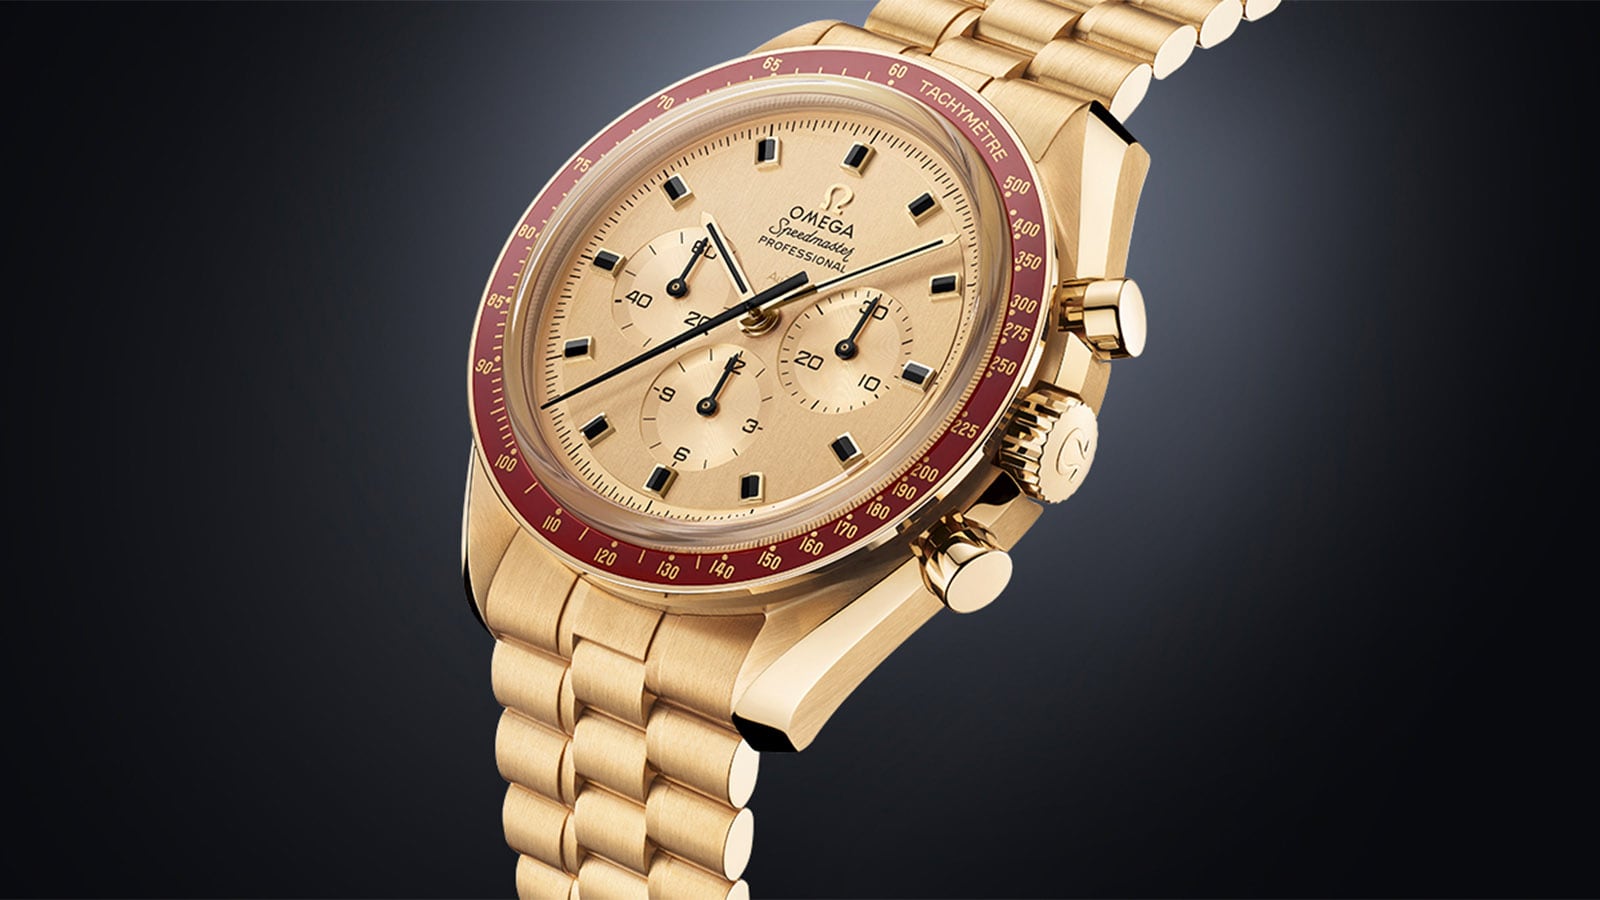 Where To Buy Fake Rolex Watches In Nyc